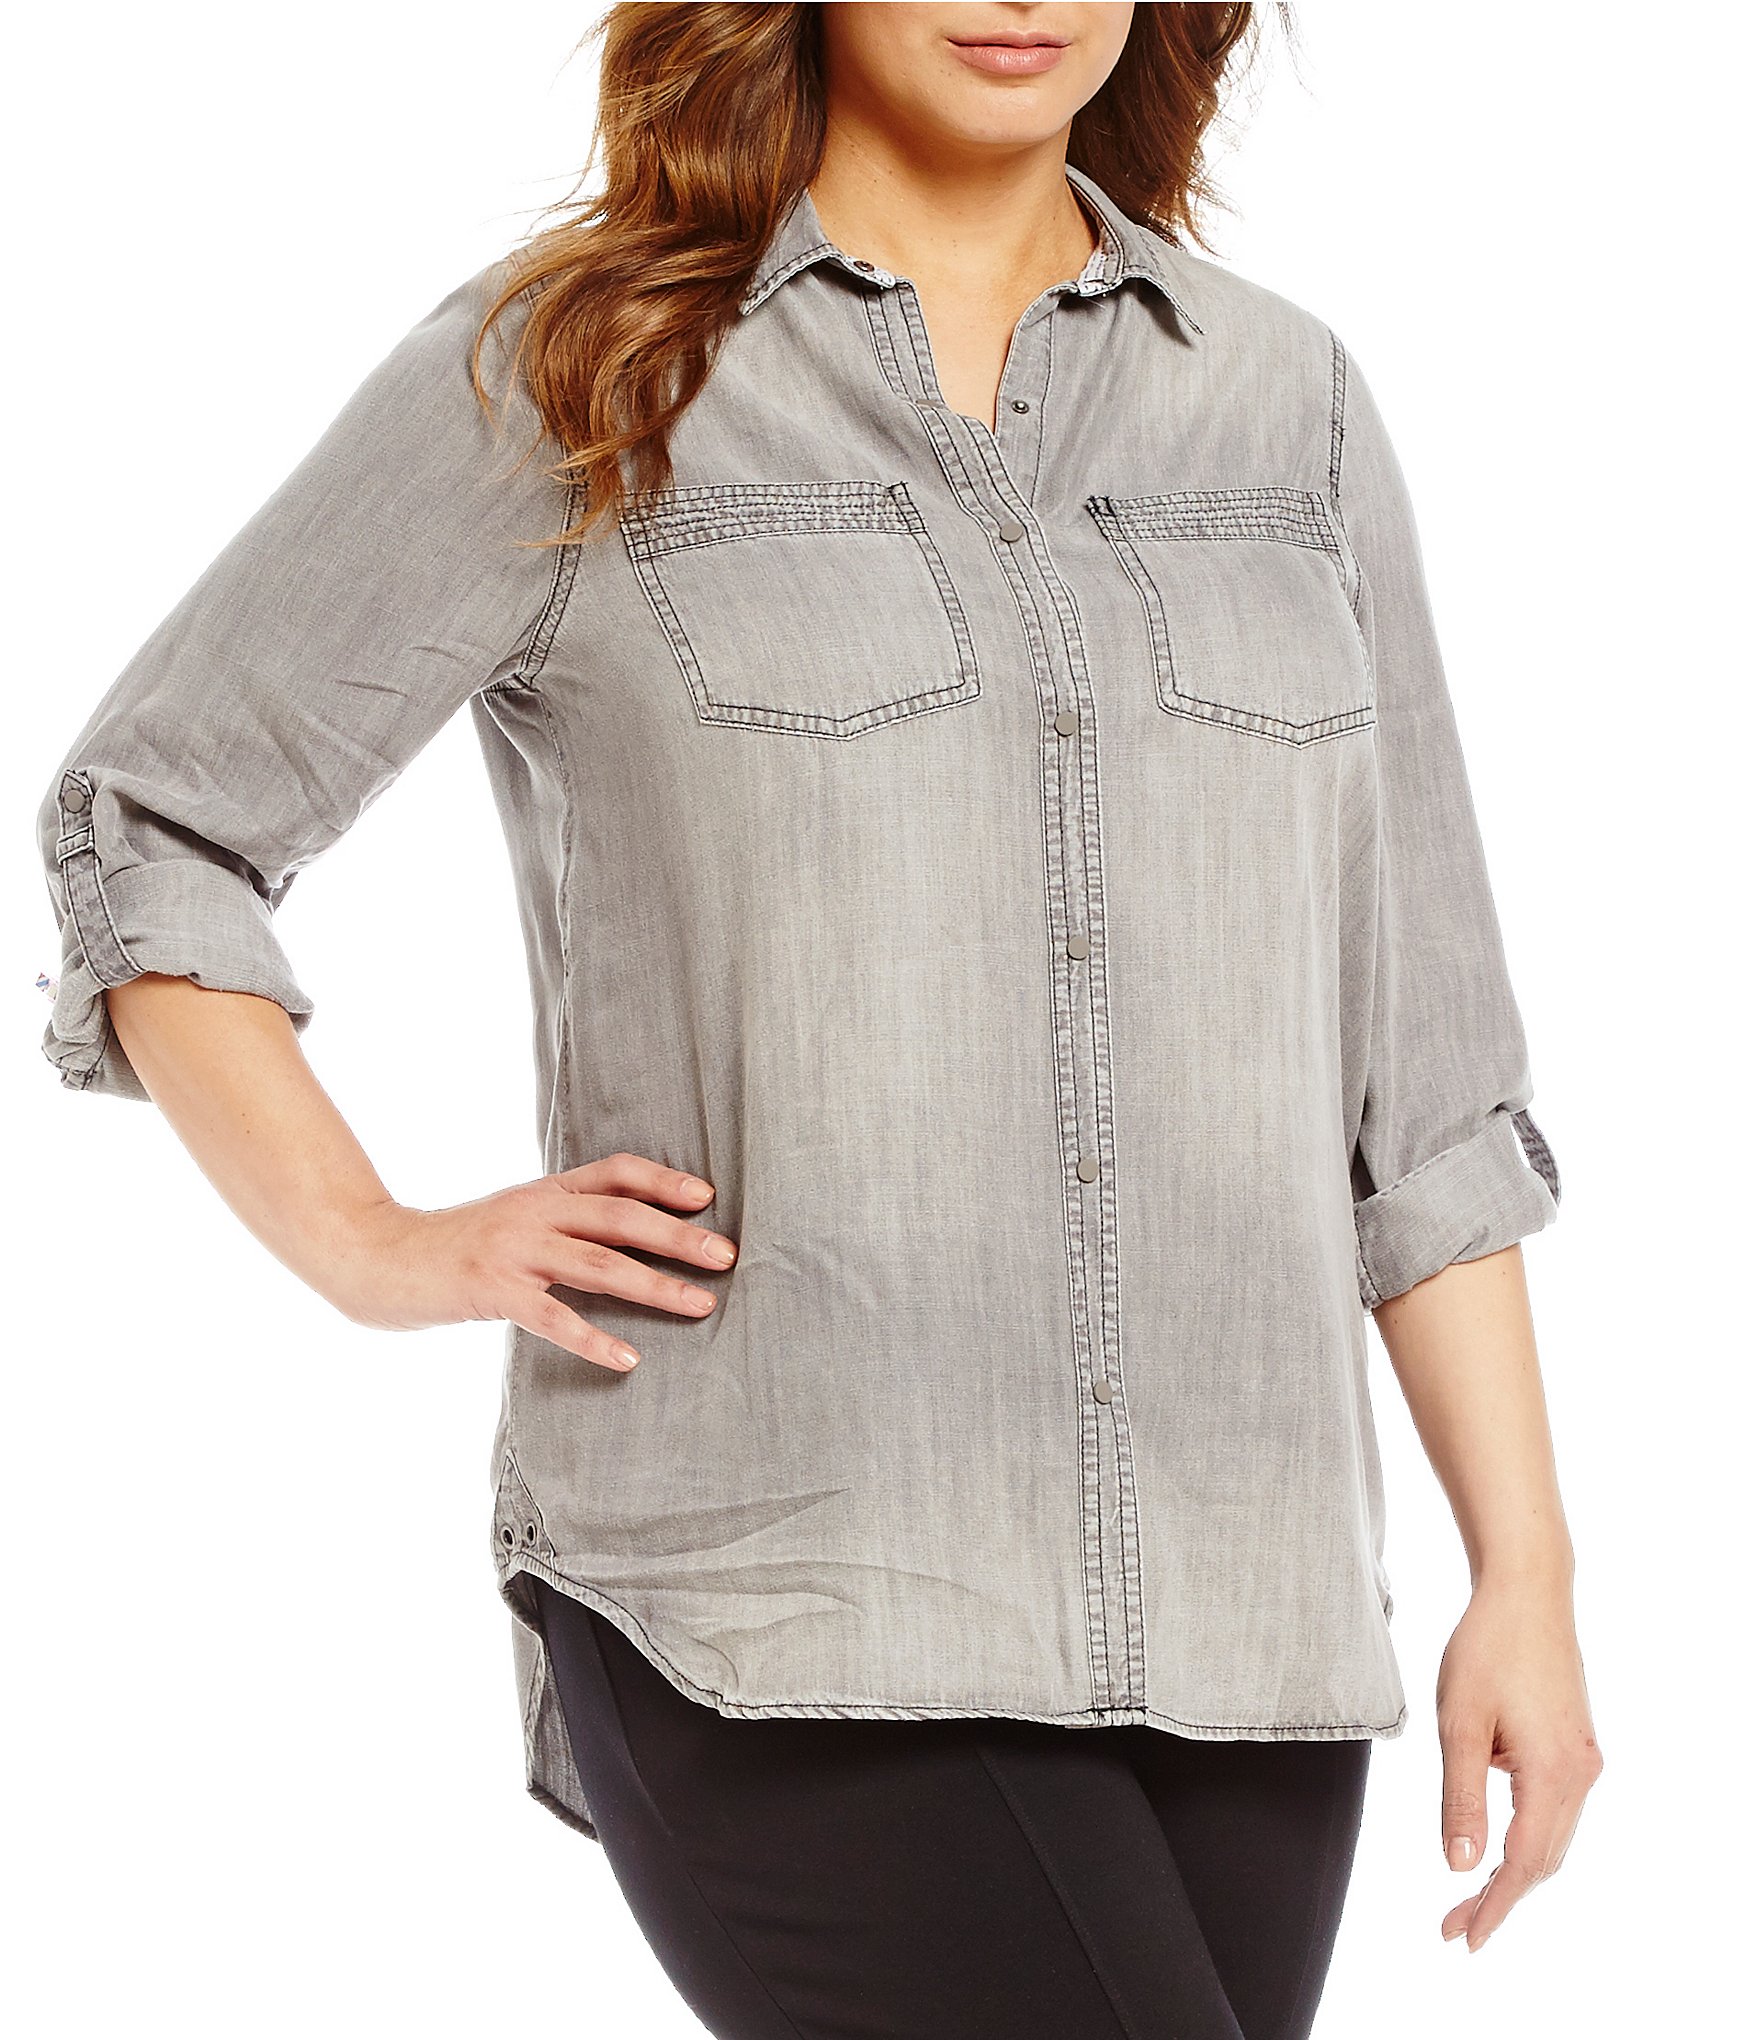 Plus Size Women's Suprema® Strappy Neckline Top by Catherines in Heather  Grey (Size 4X) - Yahoo Shopping